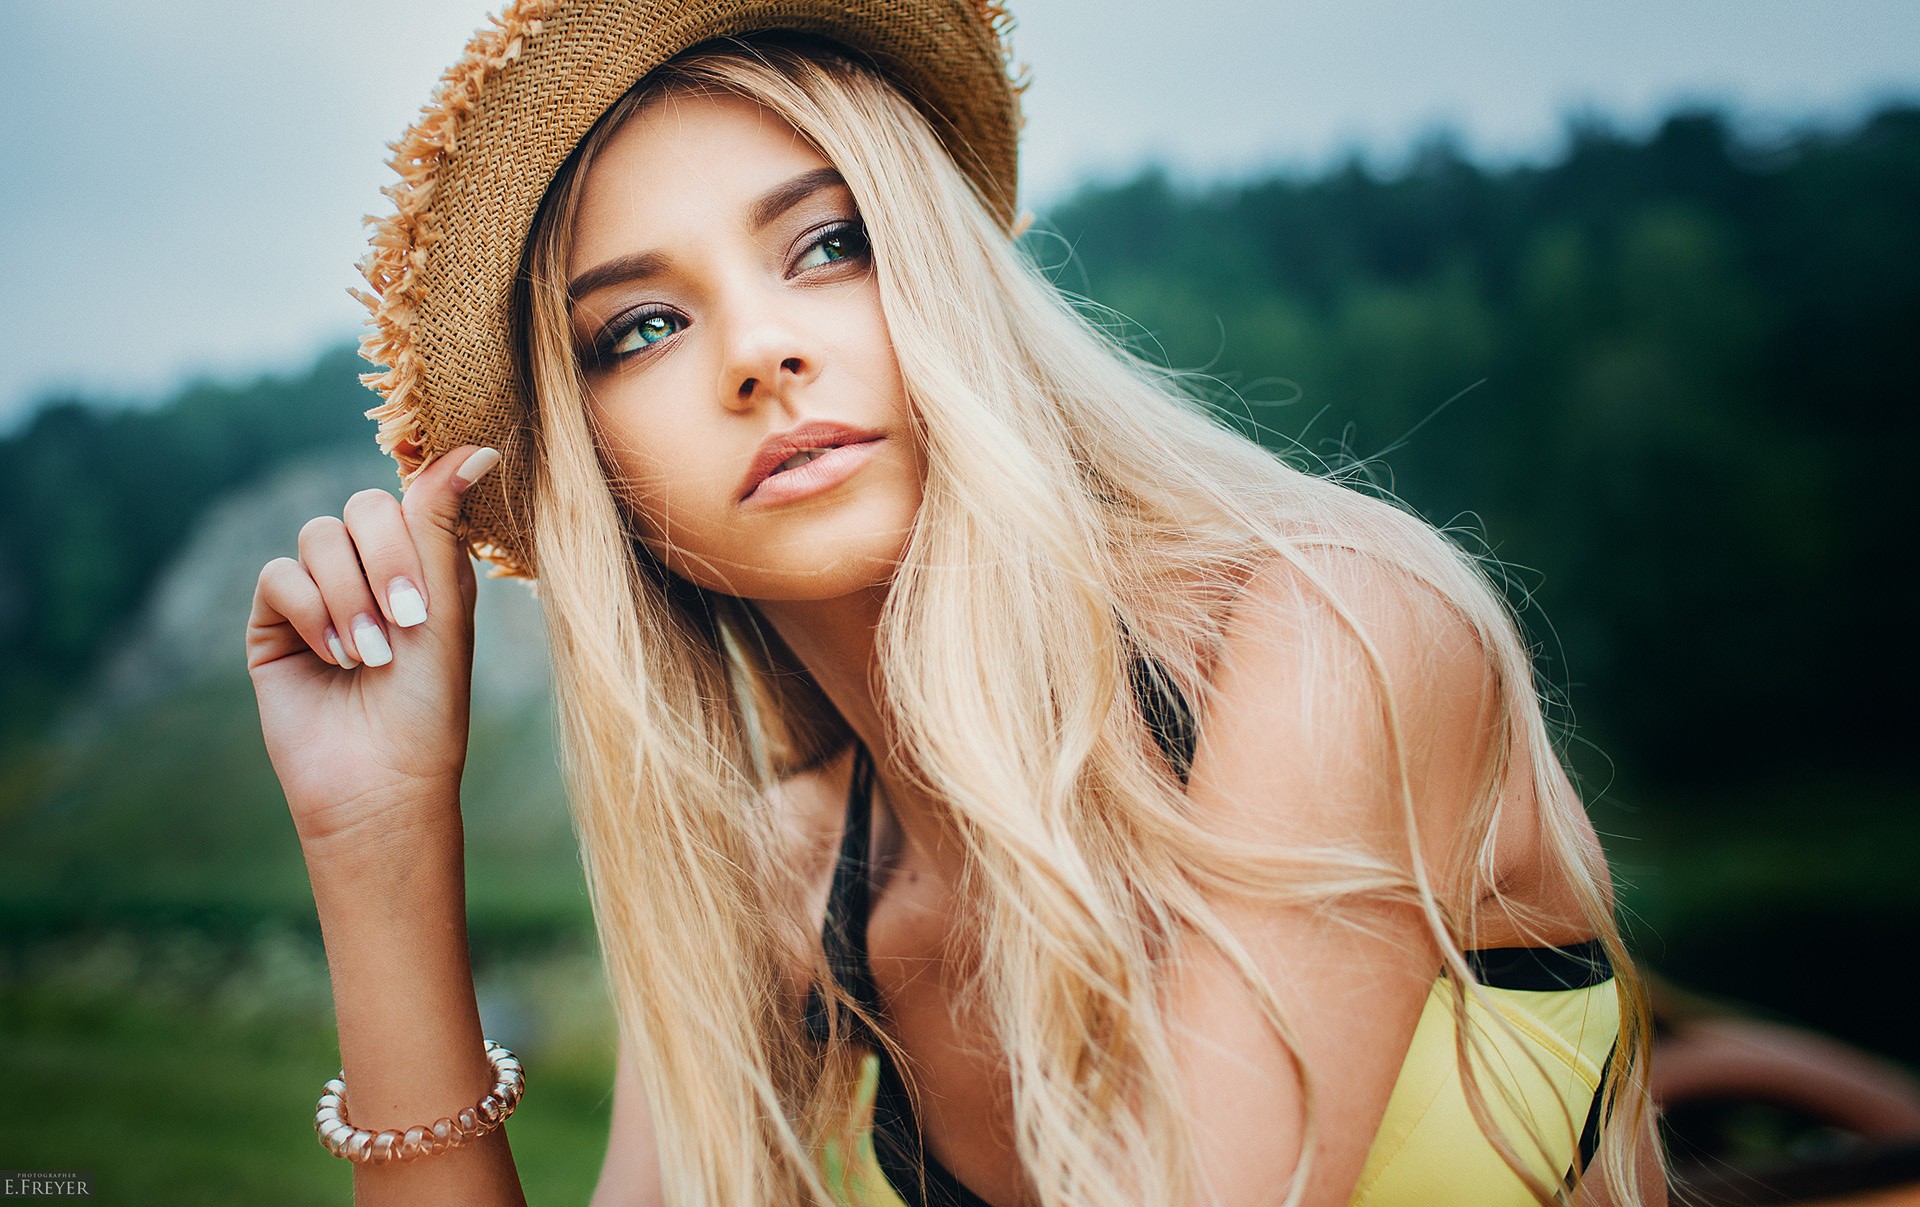 People 1920x1207 women face portrait hat blonde looking away Evgeny Freyer Polina Kostyuk straw hat makeup white nails painted nails bracelets women with hats women outdoors watermarked